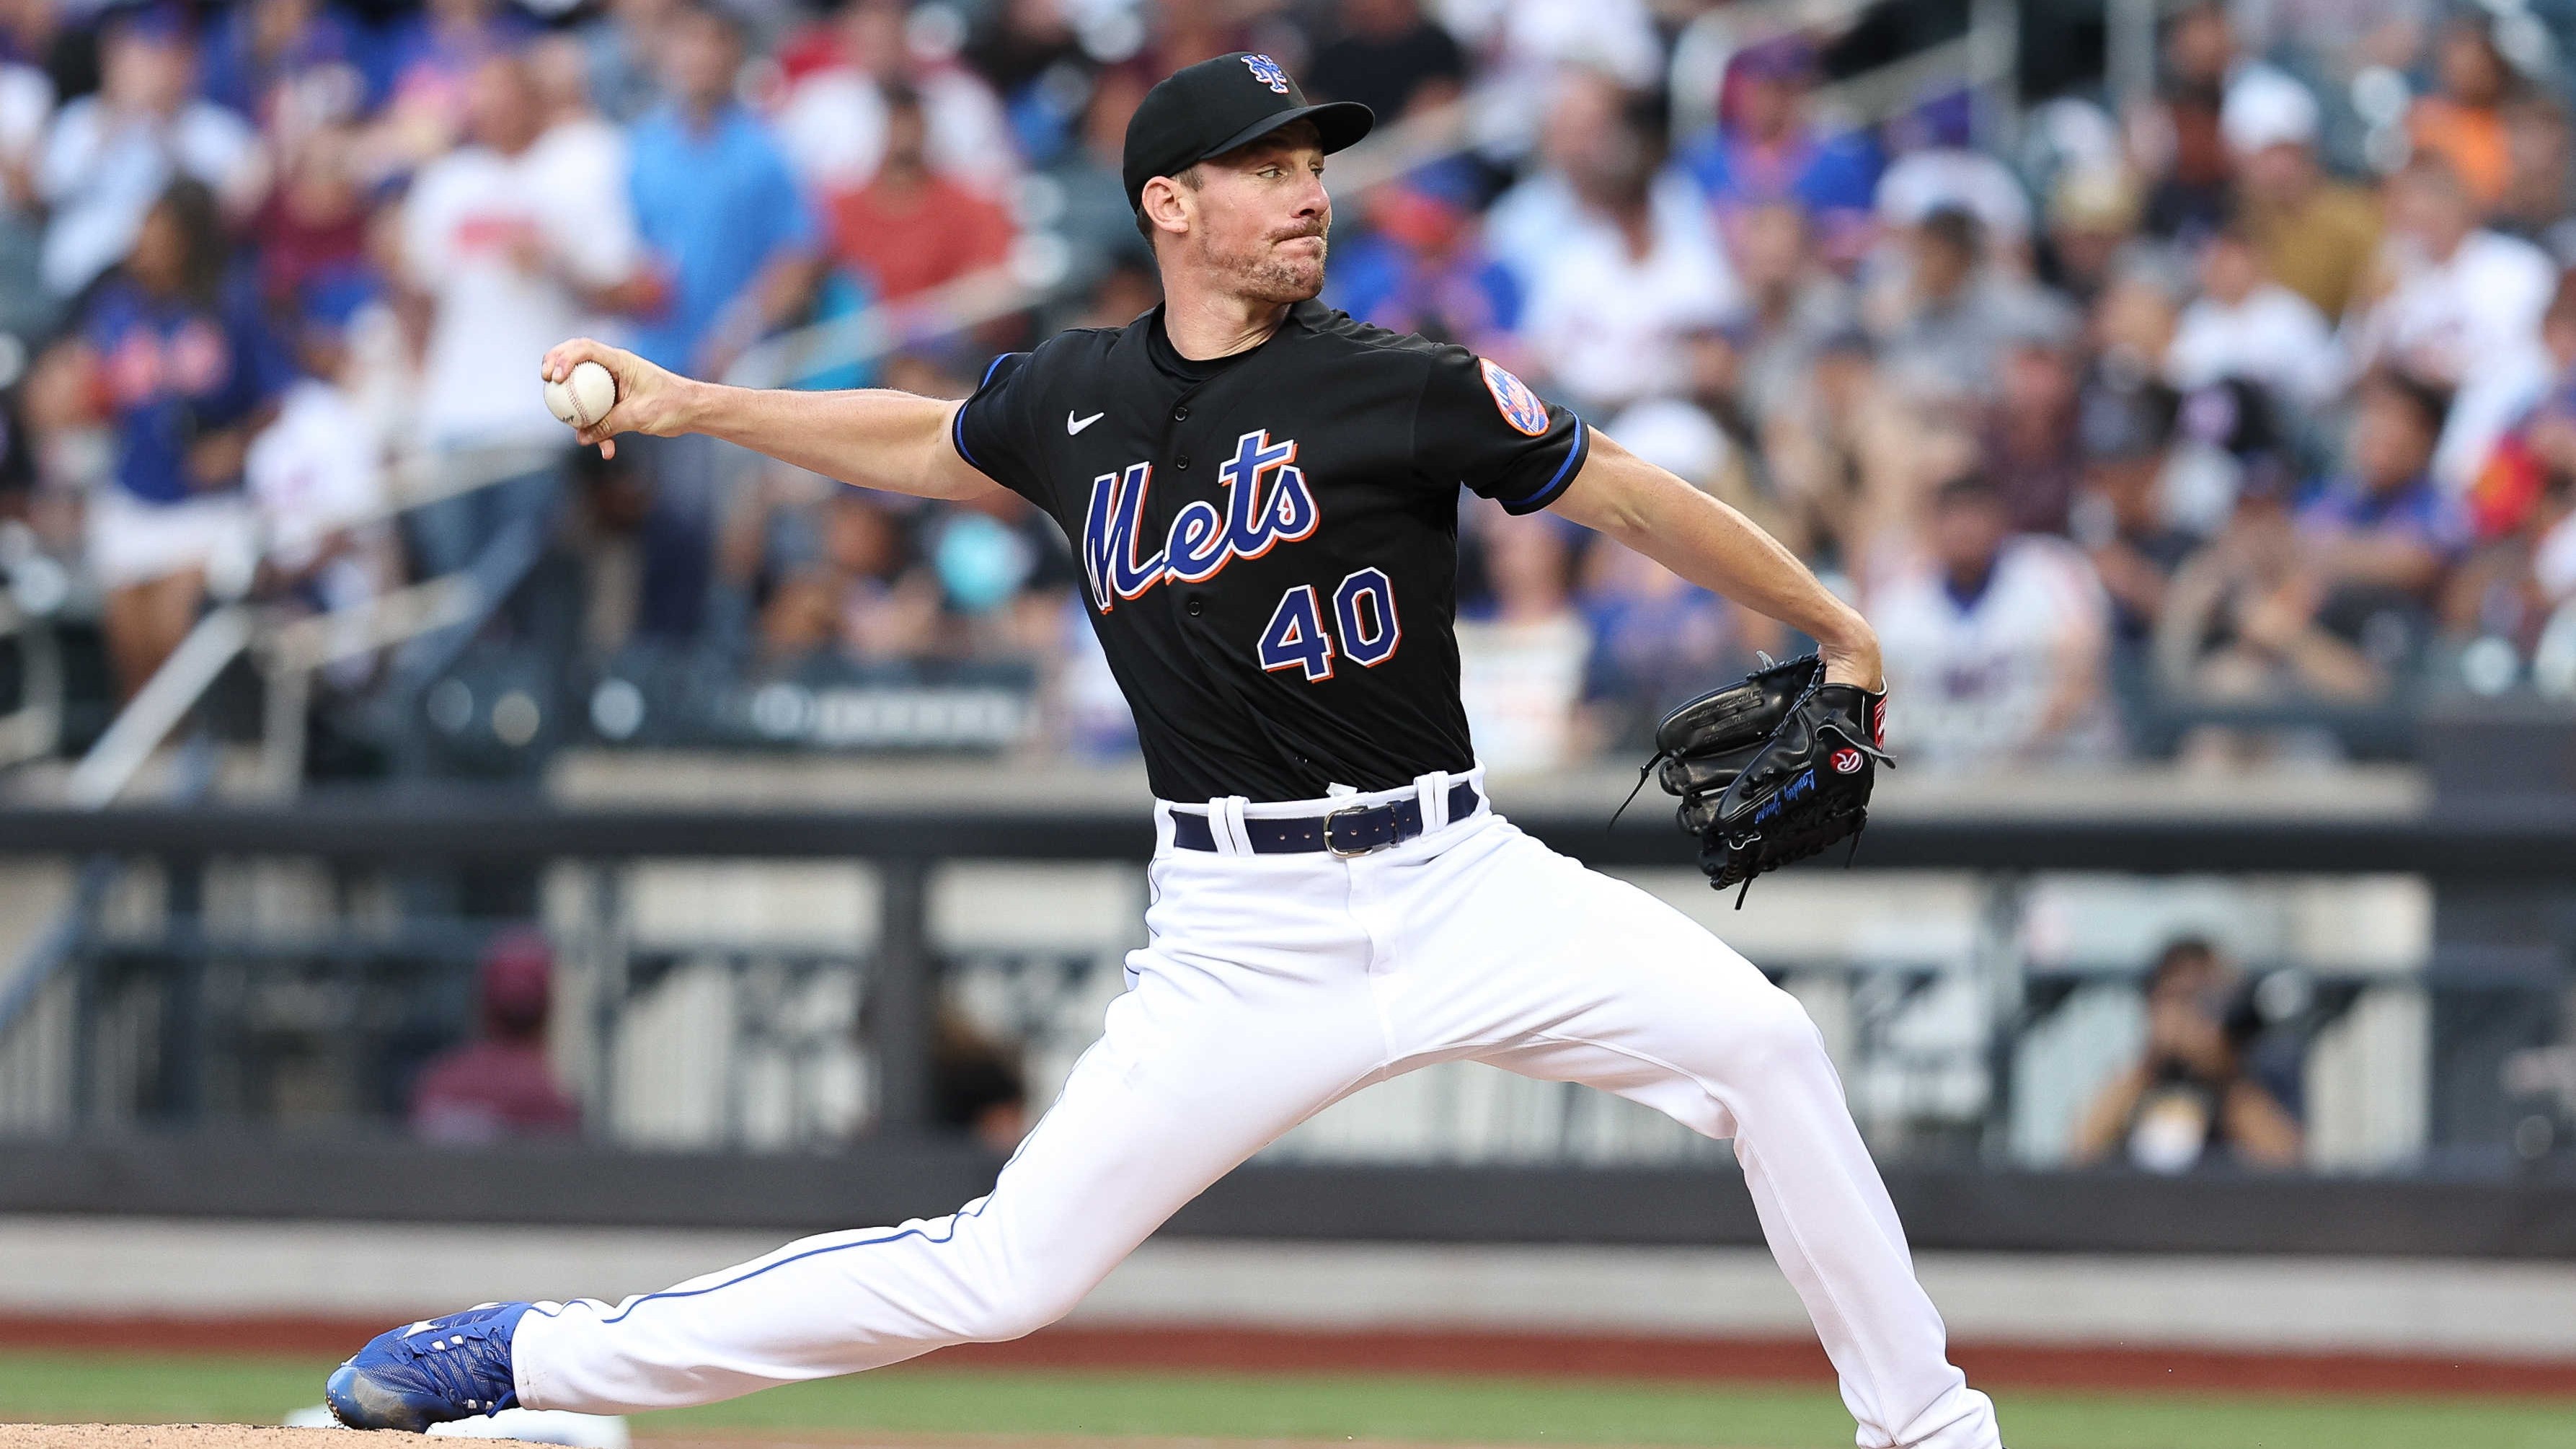 Will Chris Bassitt pitch for the Mets in 2023?, Mets Stay or Go